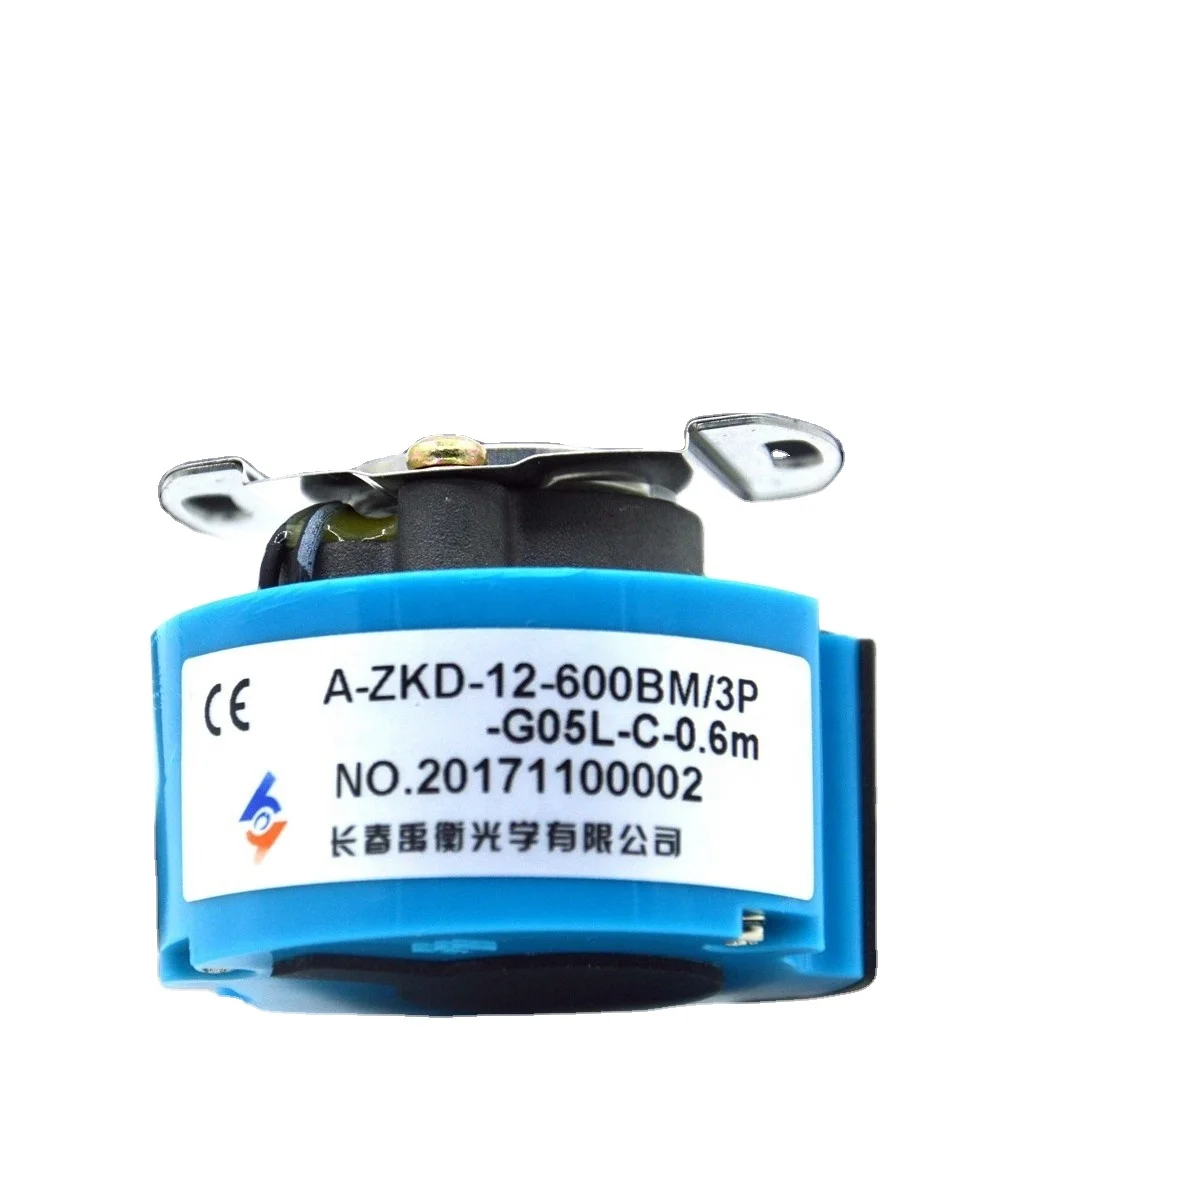 

A-ZKD-12J-250BM/4P-G05L-A YUHENG Hollow shaft servo motor encoder New original genuine goods are available from stock